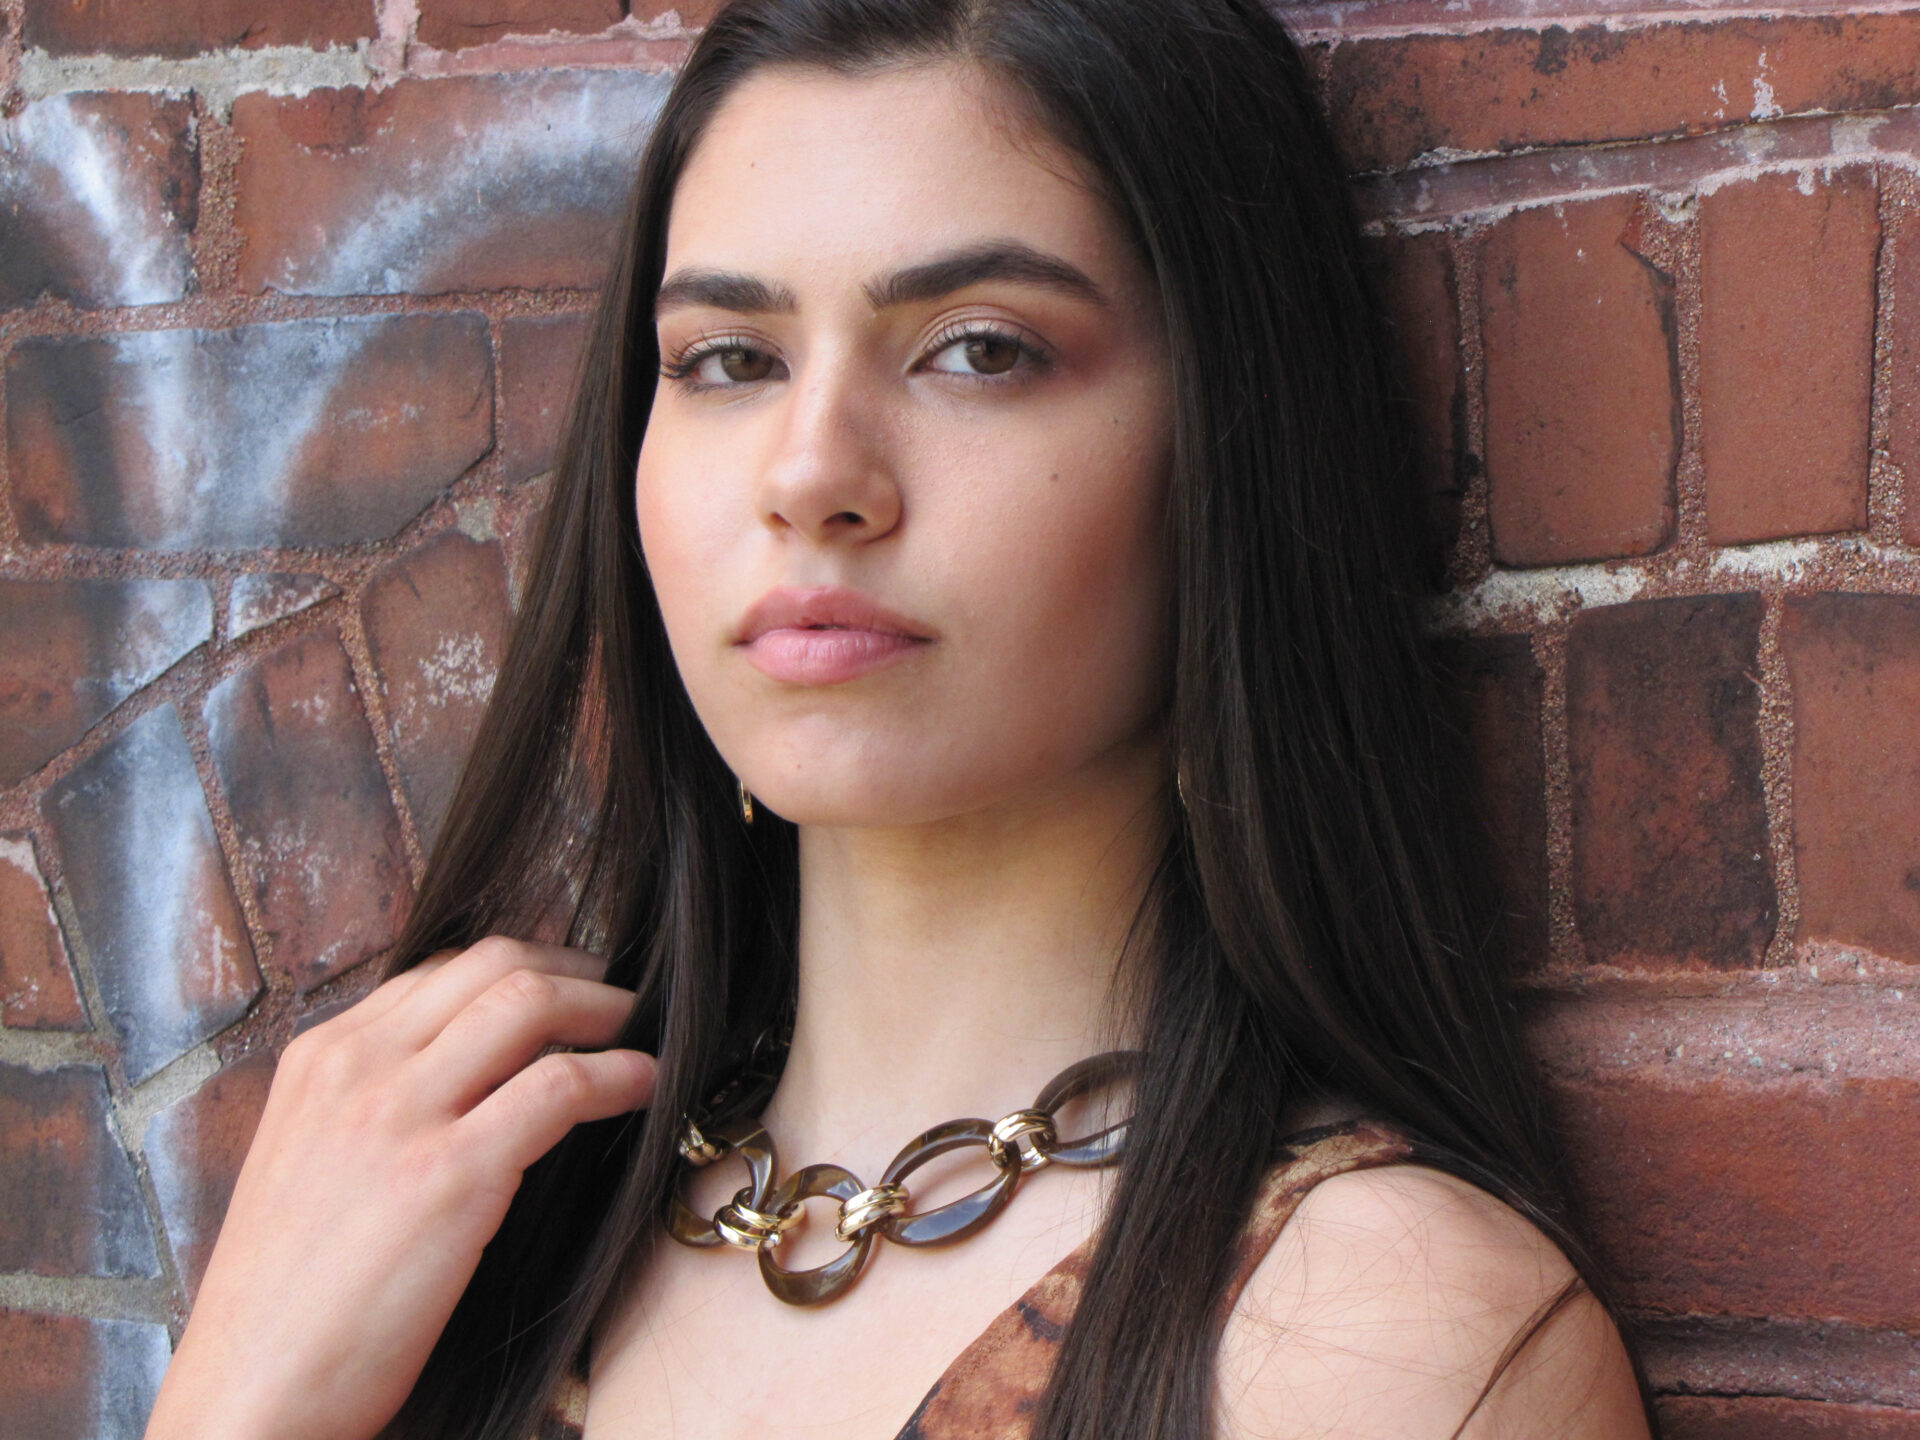 A women with black hair wearing a necklace